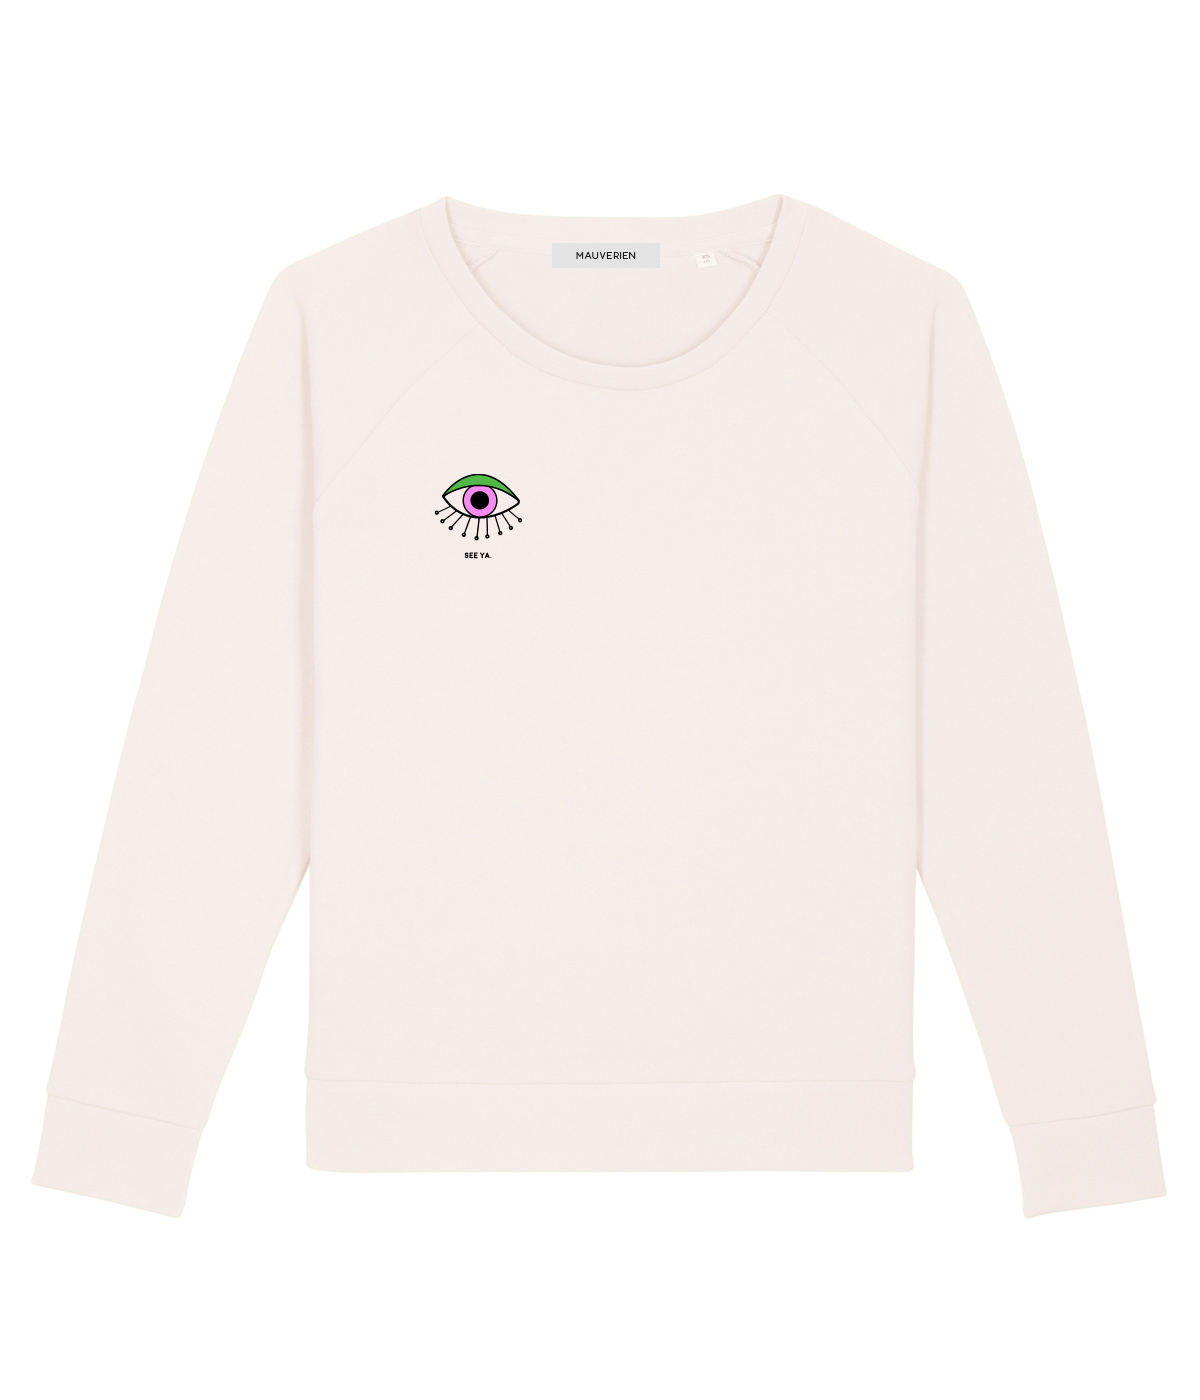 The front of a beige cotton sweatshirt printed with one eye colored in purple and green and placed in the top right.